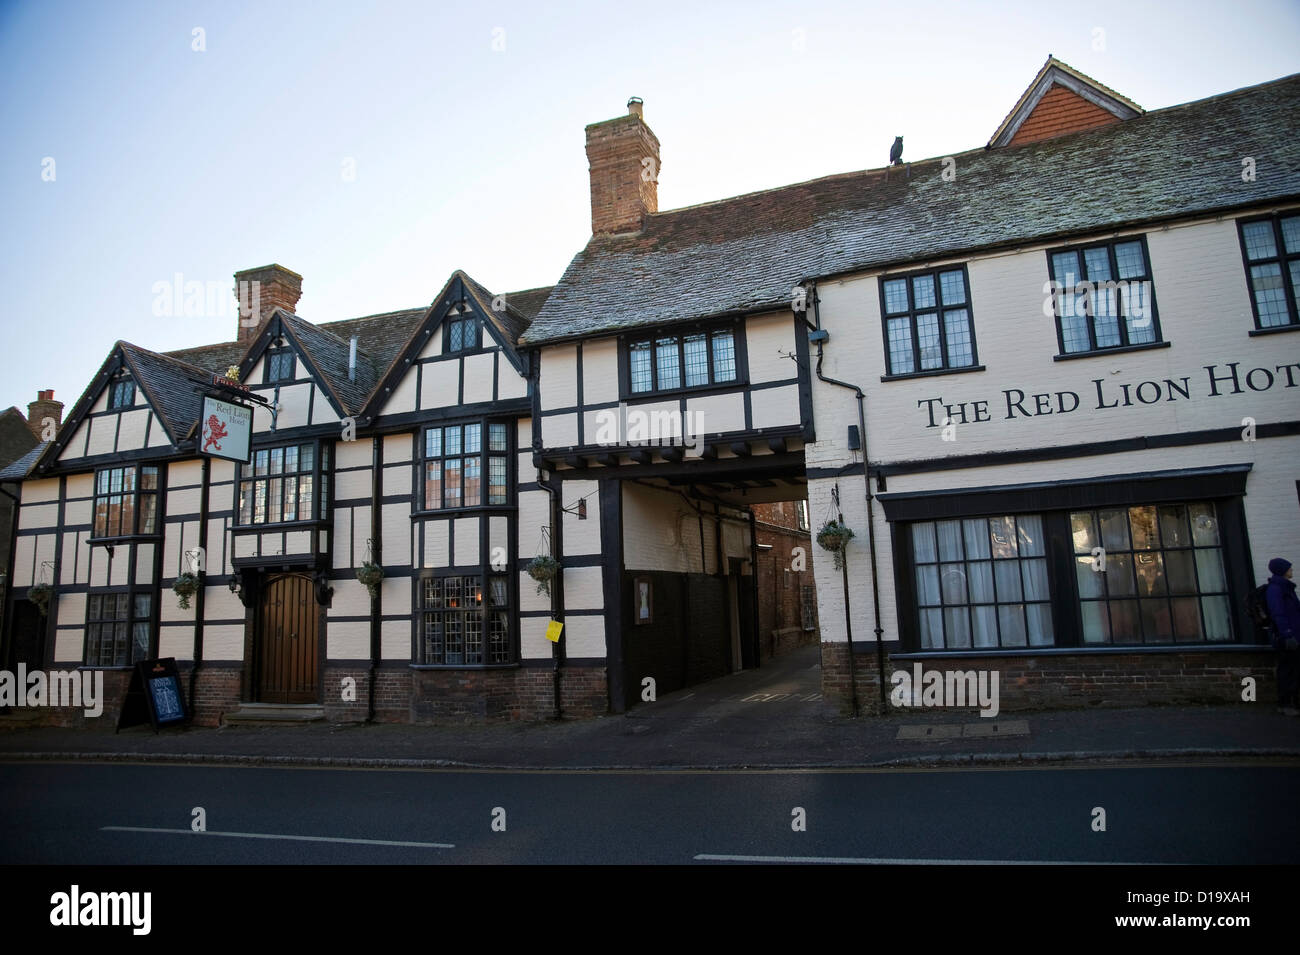 The Red Lion Hotel in Wendover, Buckinghamshire, UK Stock Photo